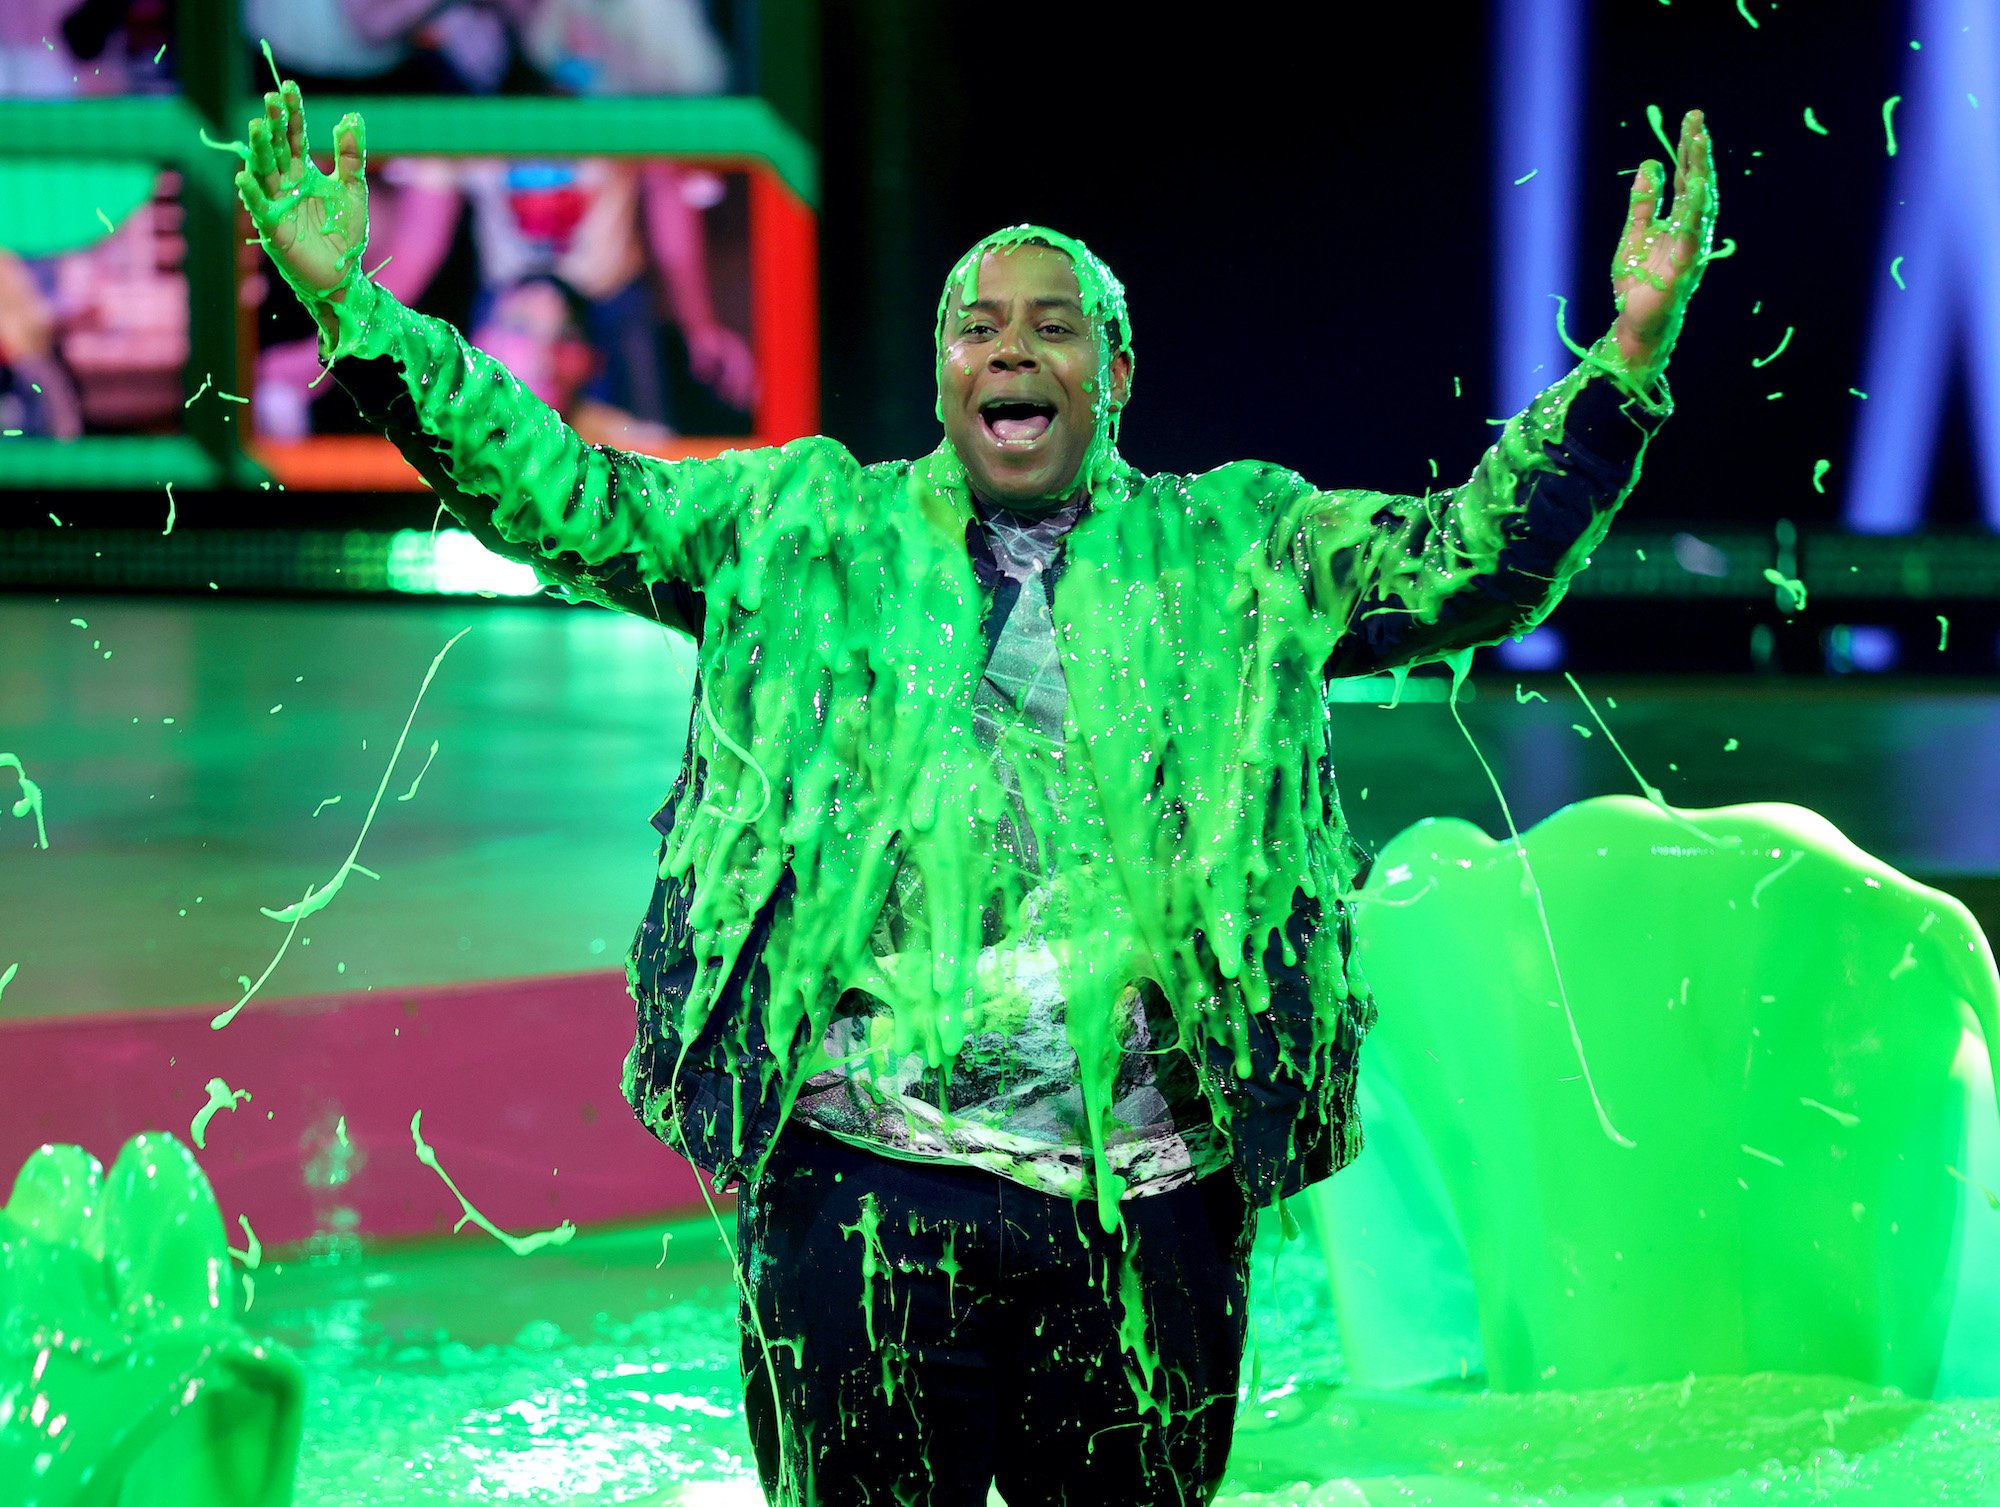 Nickelodeon Slime: What Is The Green Stuff Made Of? 05/2023